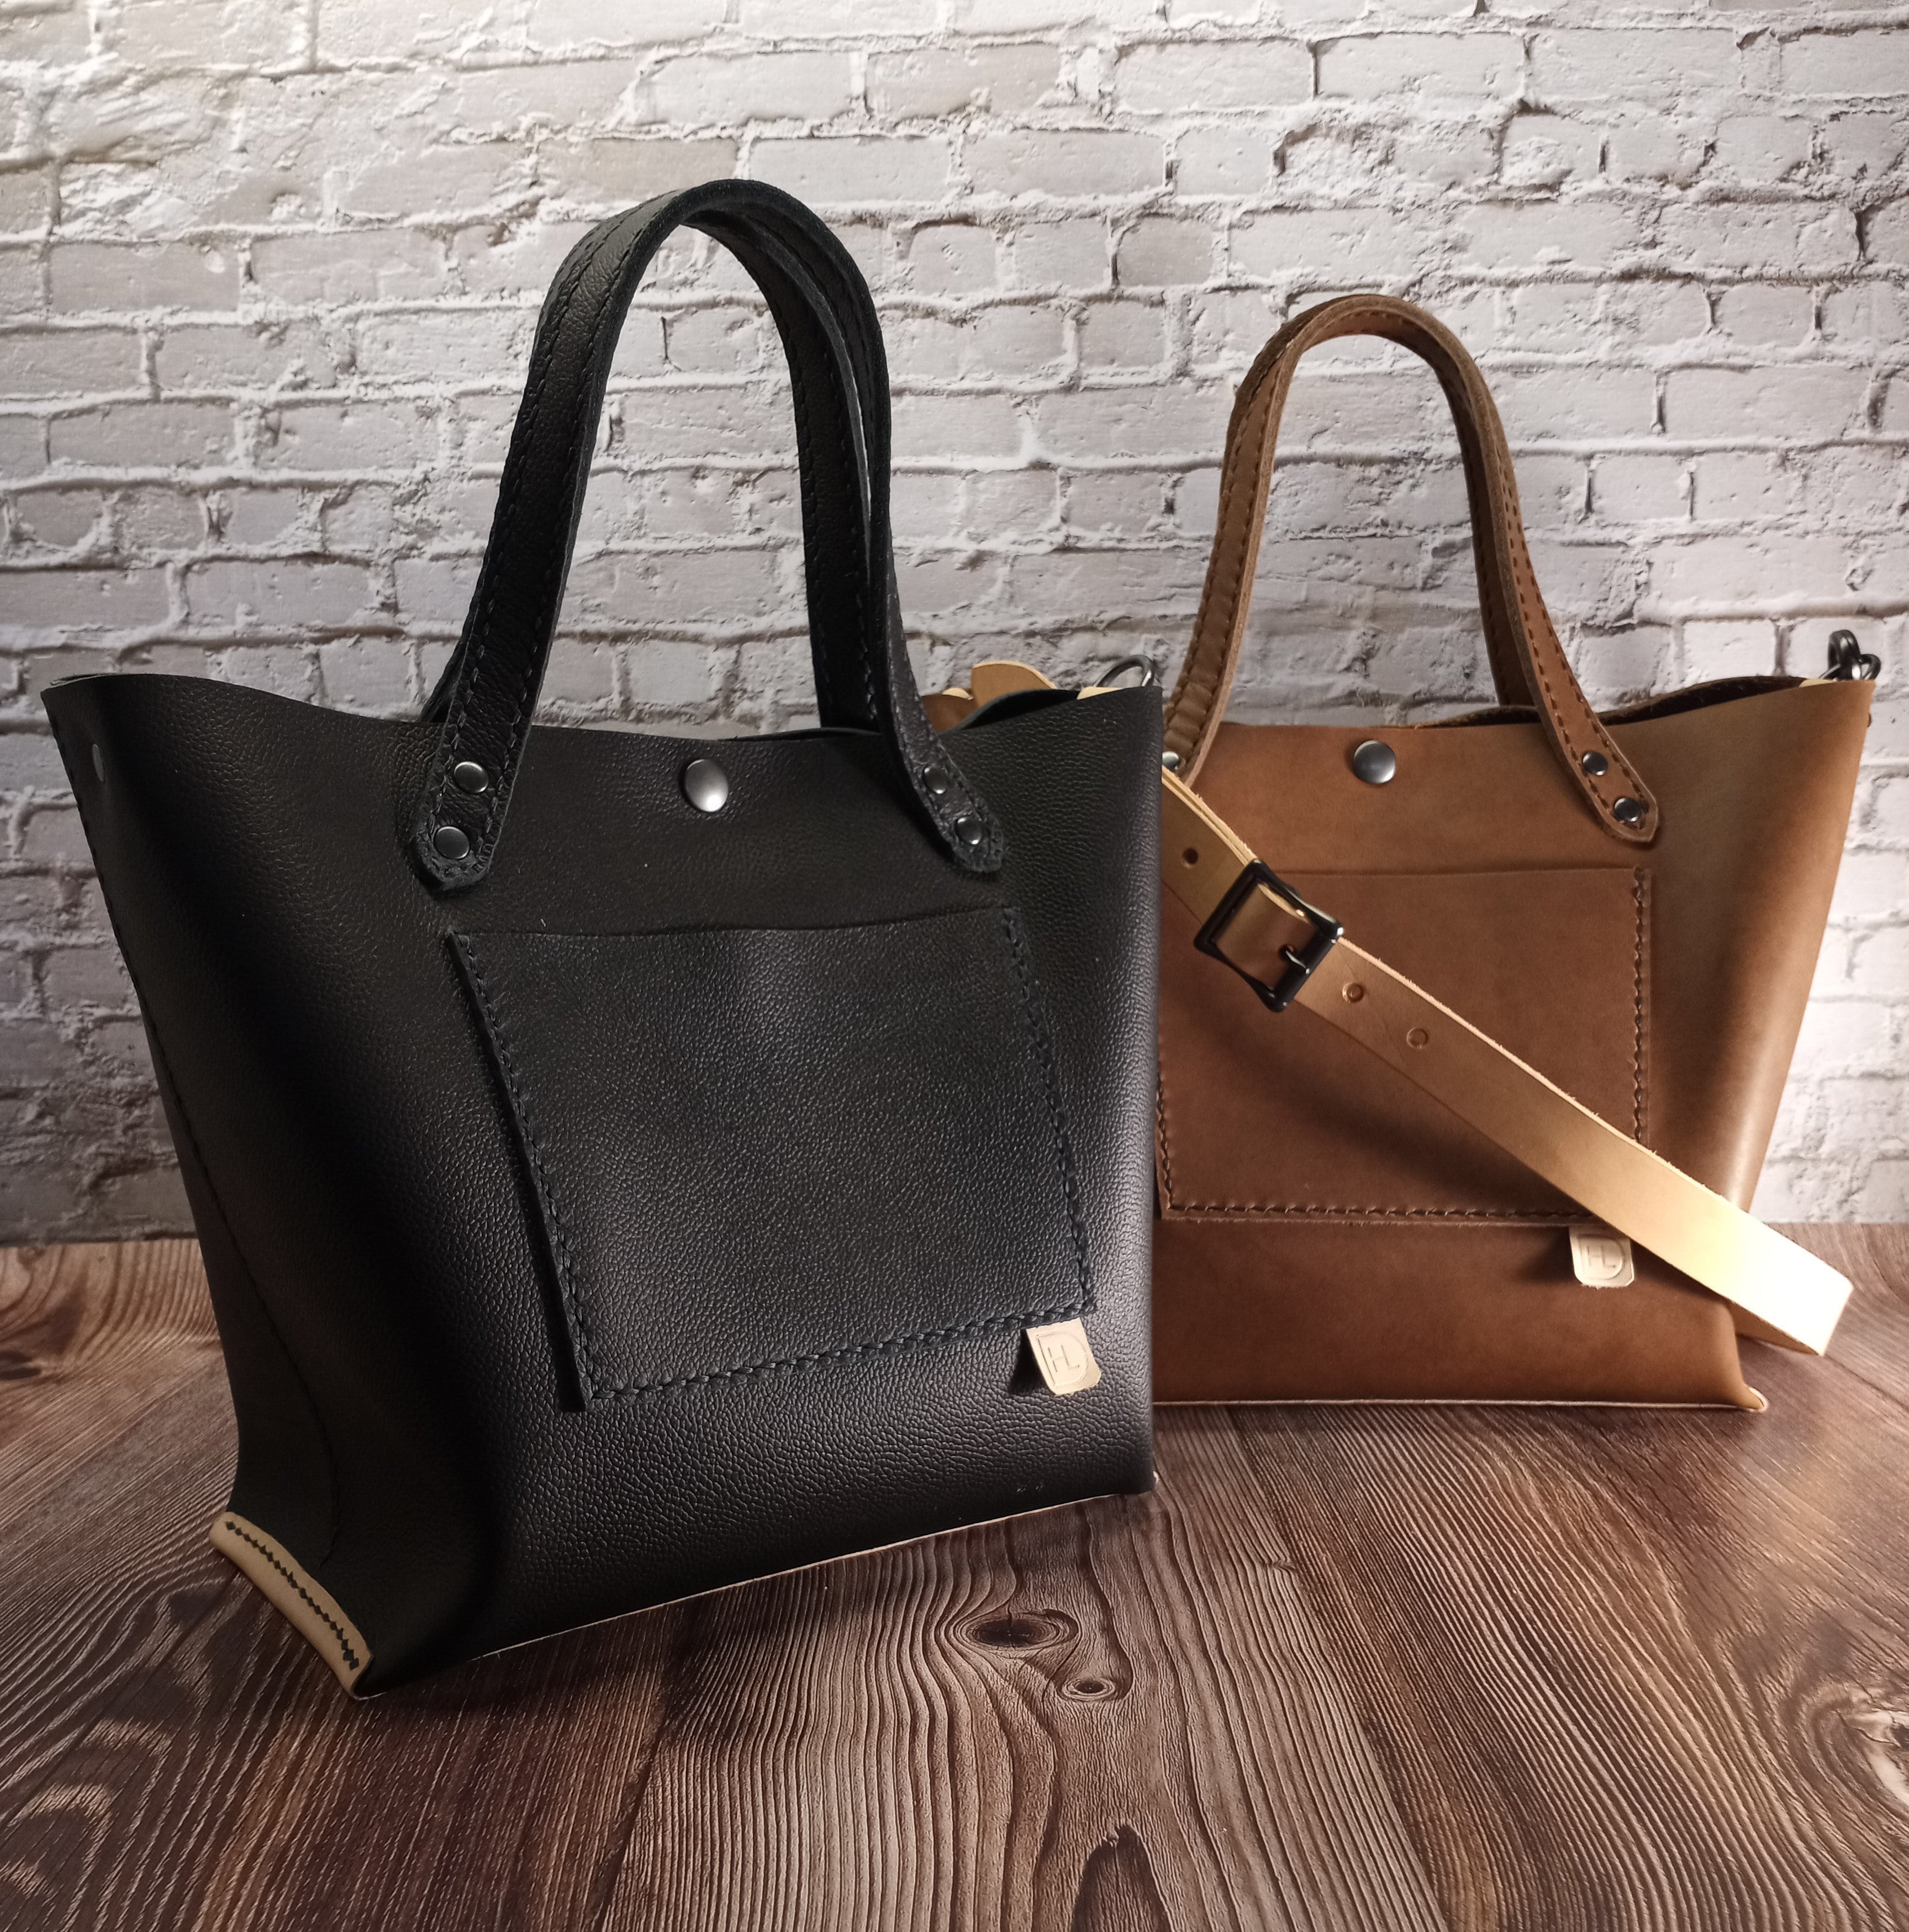 The Harper Bag in Pebbled Black - Ready to Ship